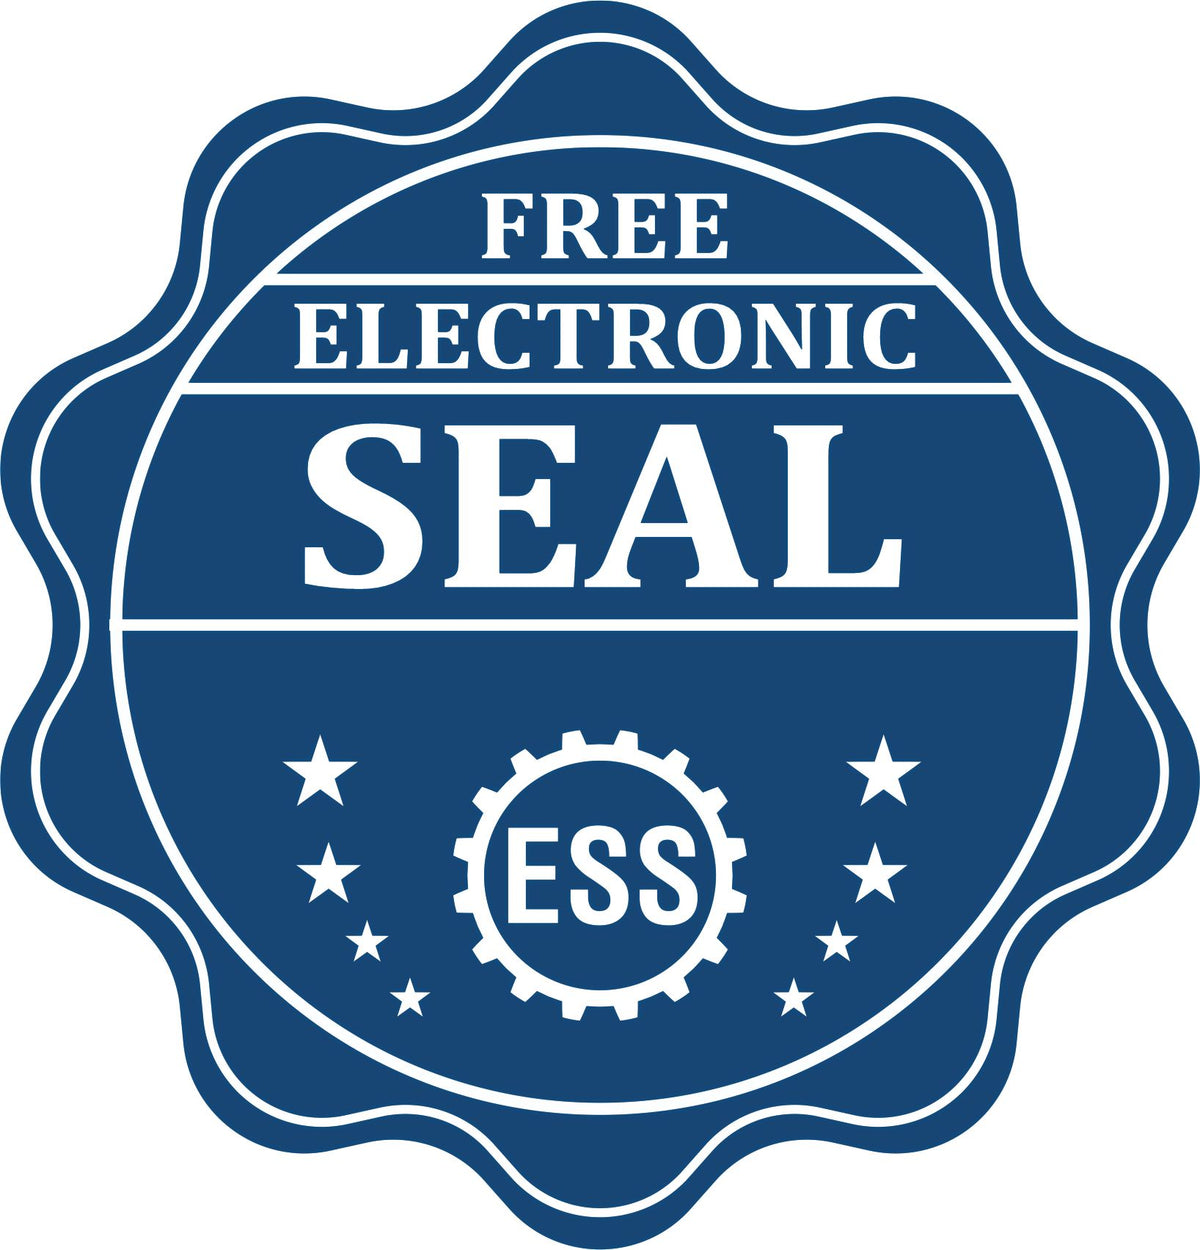 A badge showing a free electronic seal for the State of Delaware Extended Long Reach Engineer Seal with stars and the ESS gear on the emblem.